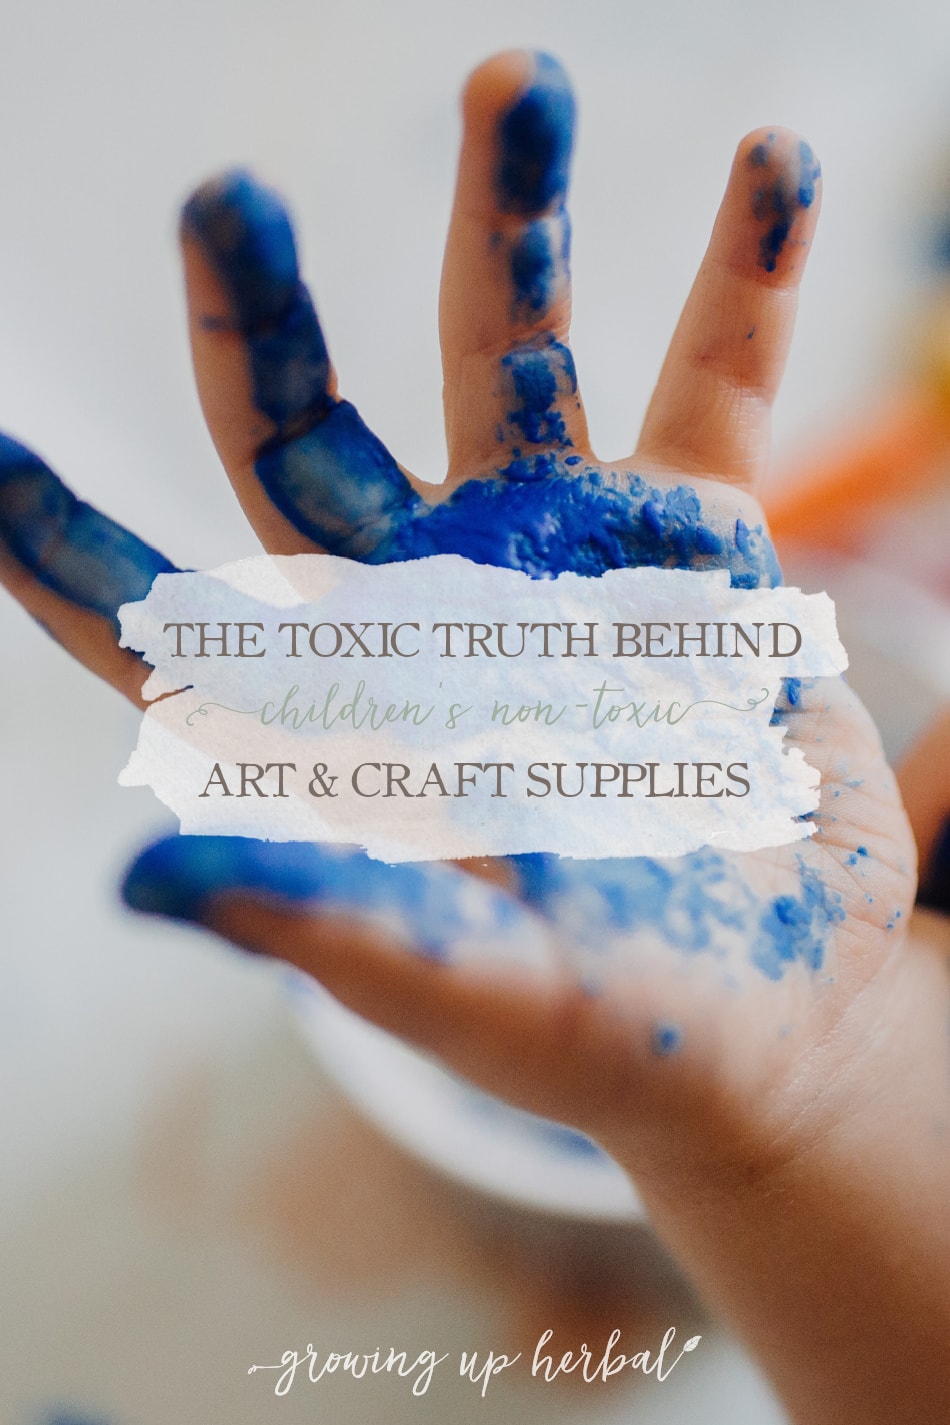 The Toxic Truth Behind Children's Non-Toxic Art and Craft Supplies